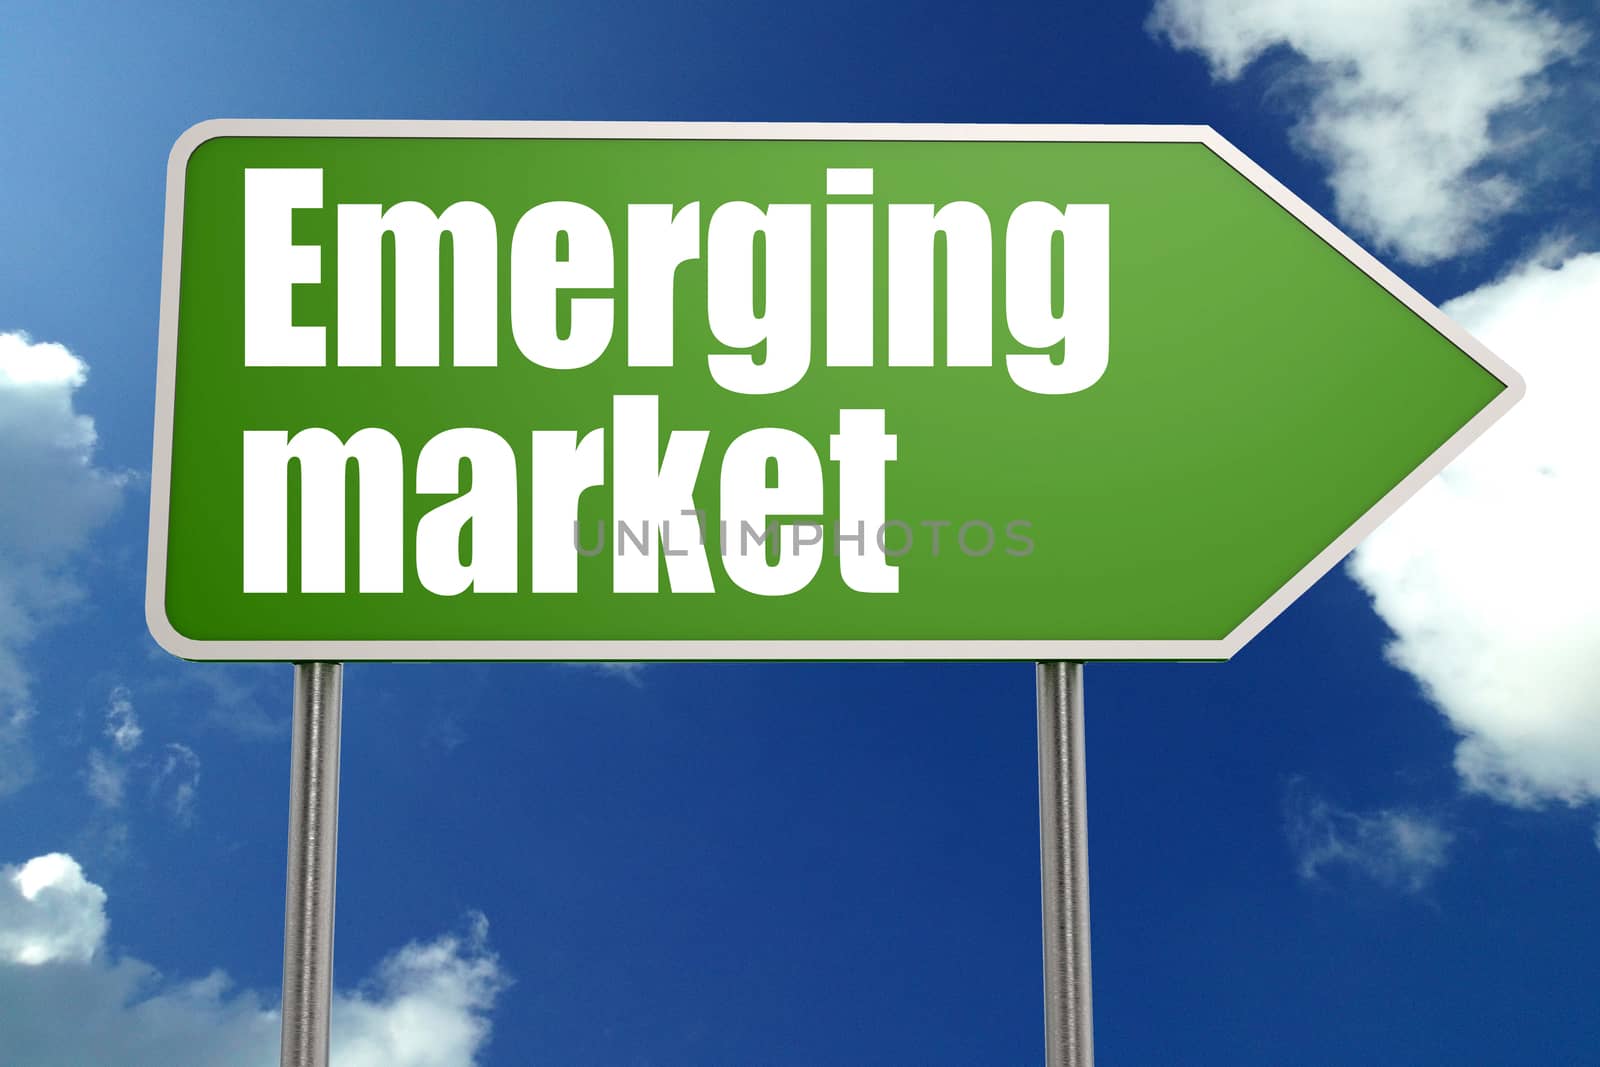 Emerging markets word with green road sign by tang90246